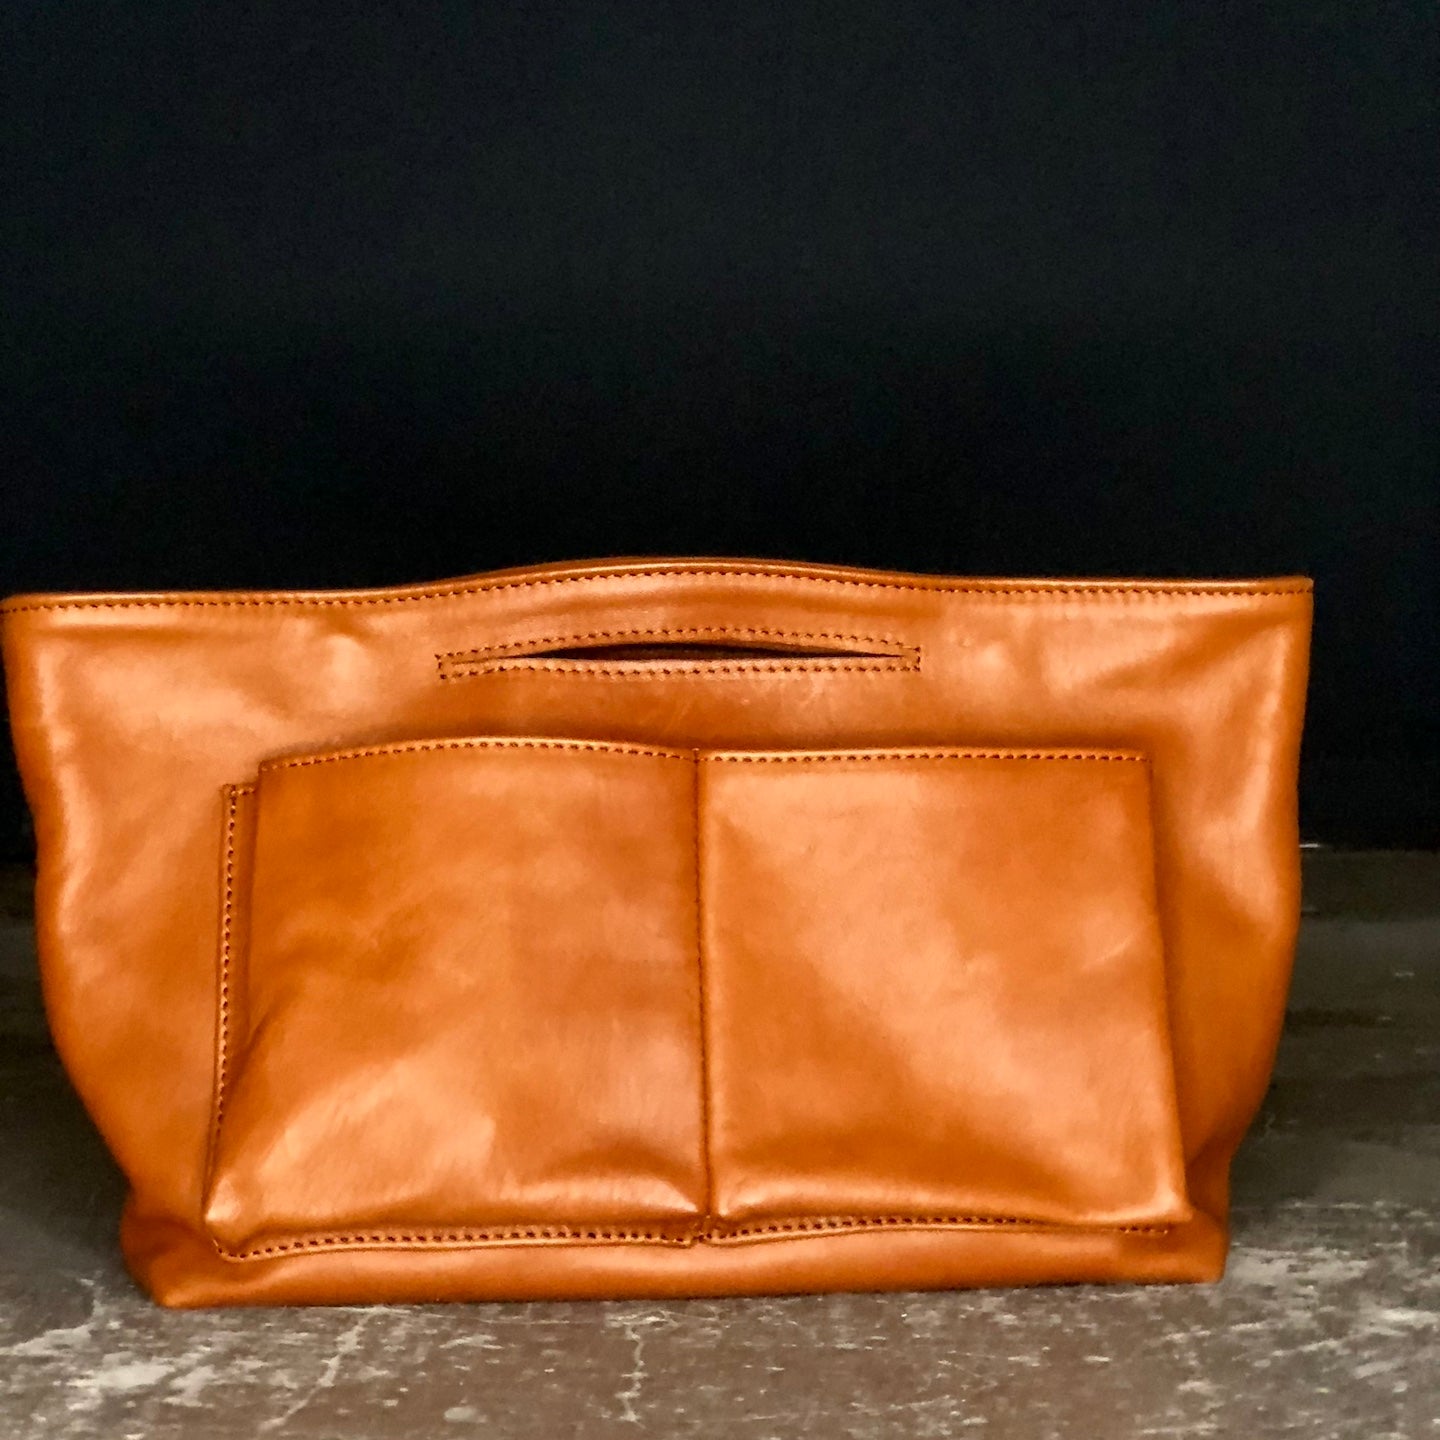 LABEL17 presents the Bag Organizer in Cognac, made of supple vegetable tanned Lamb-Nappaleather